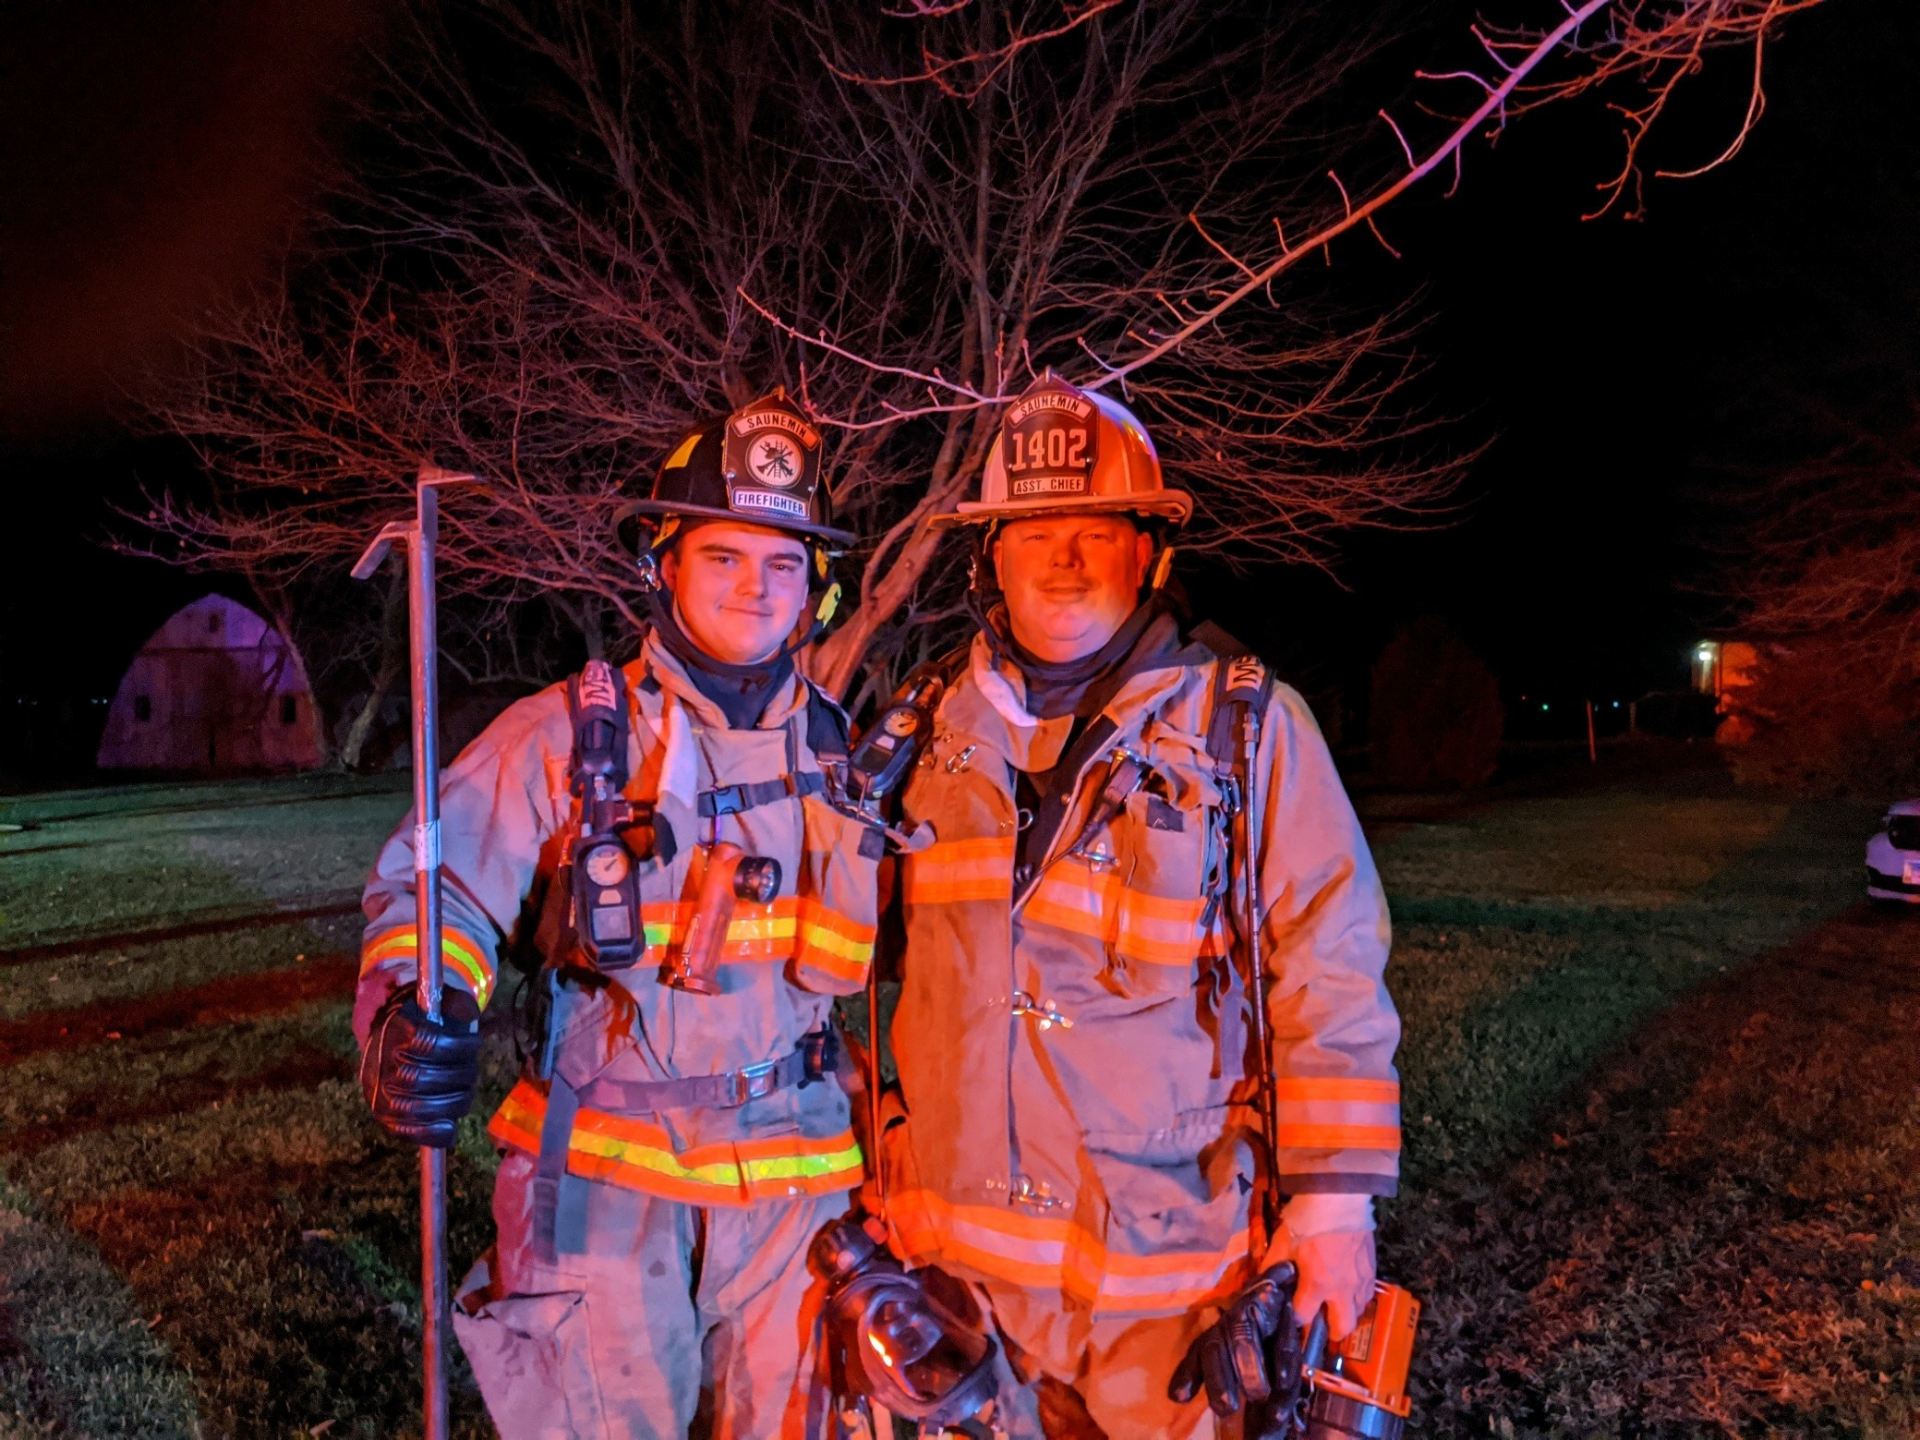 father and son firefighters pose in their protective gear.